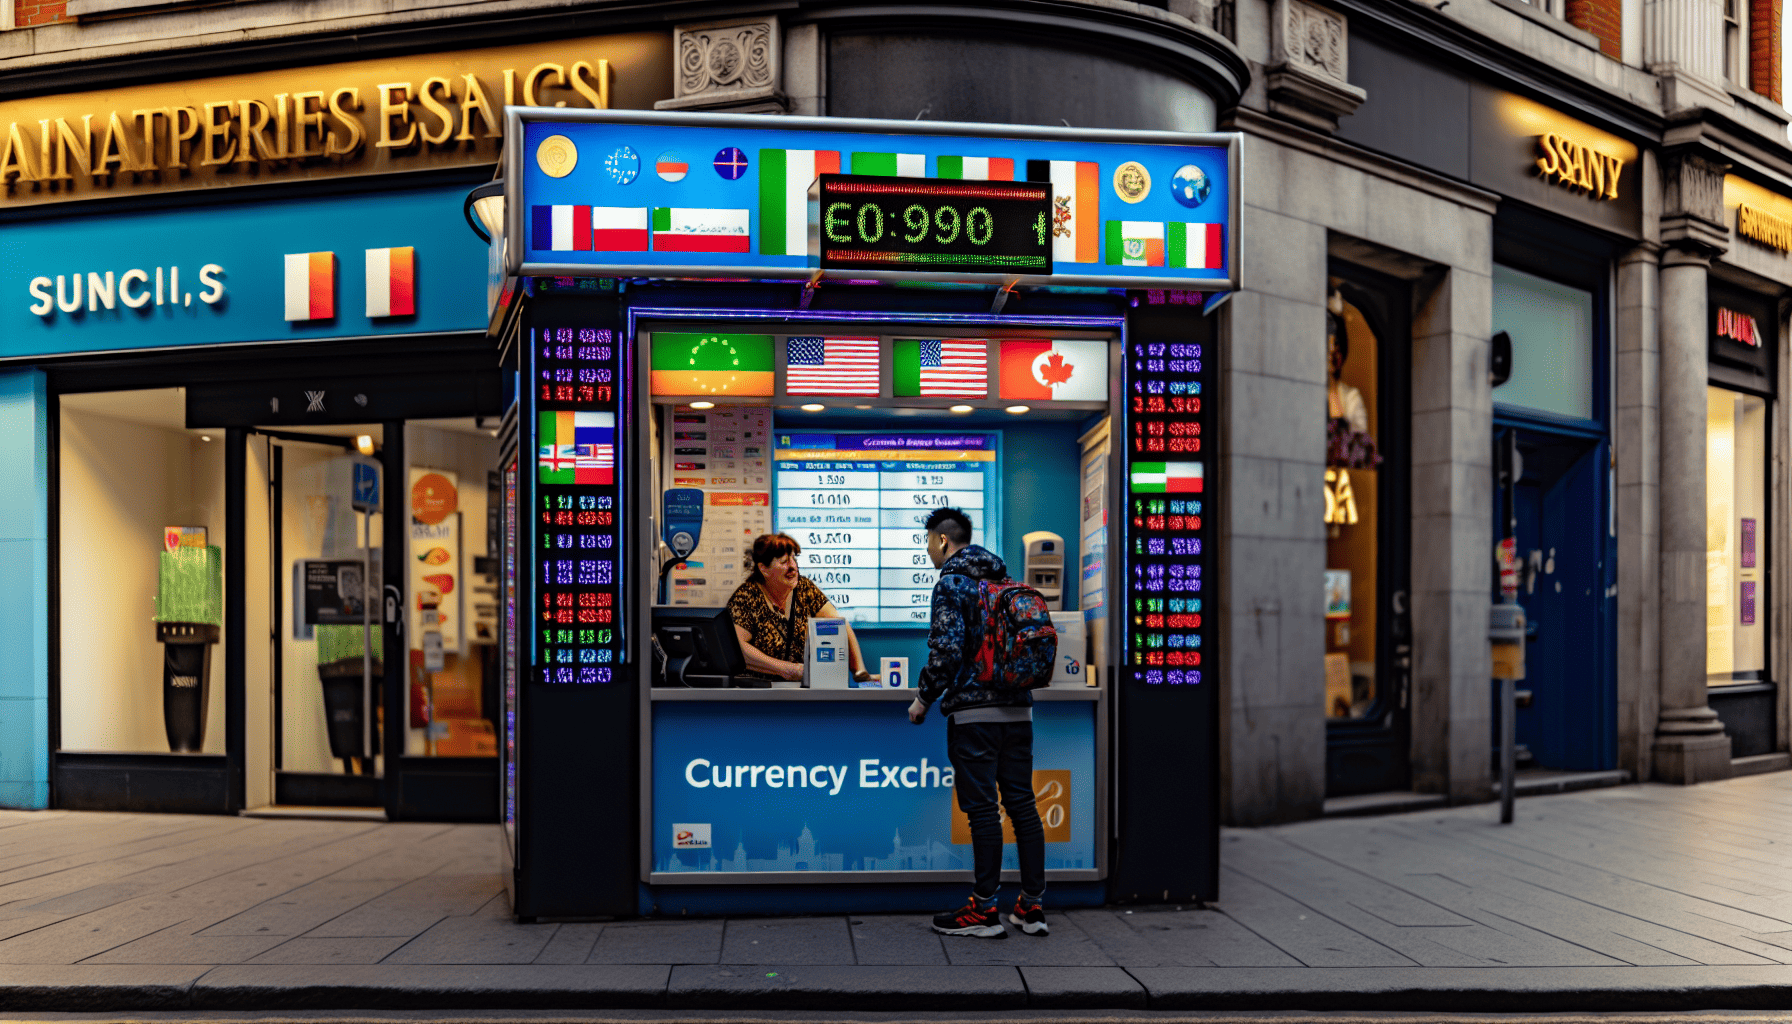 Currency exchange booth in Dublin